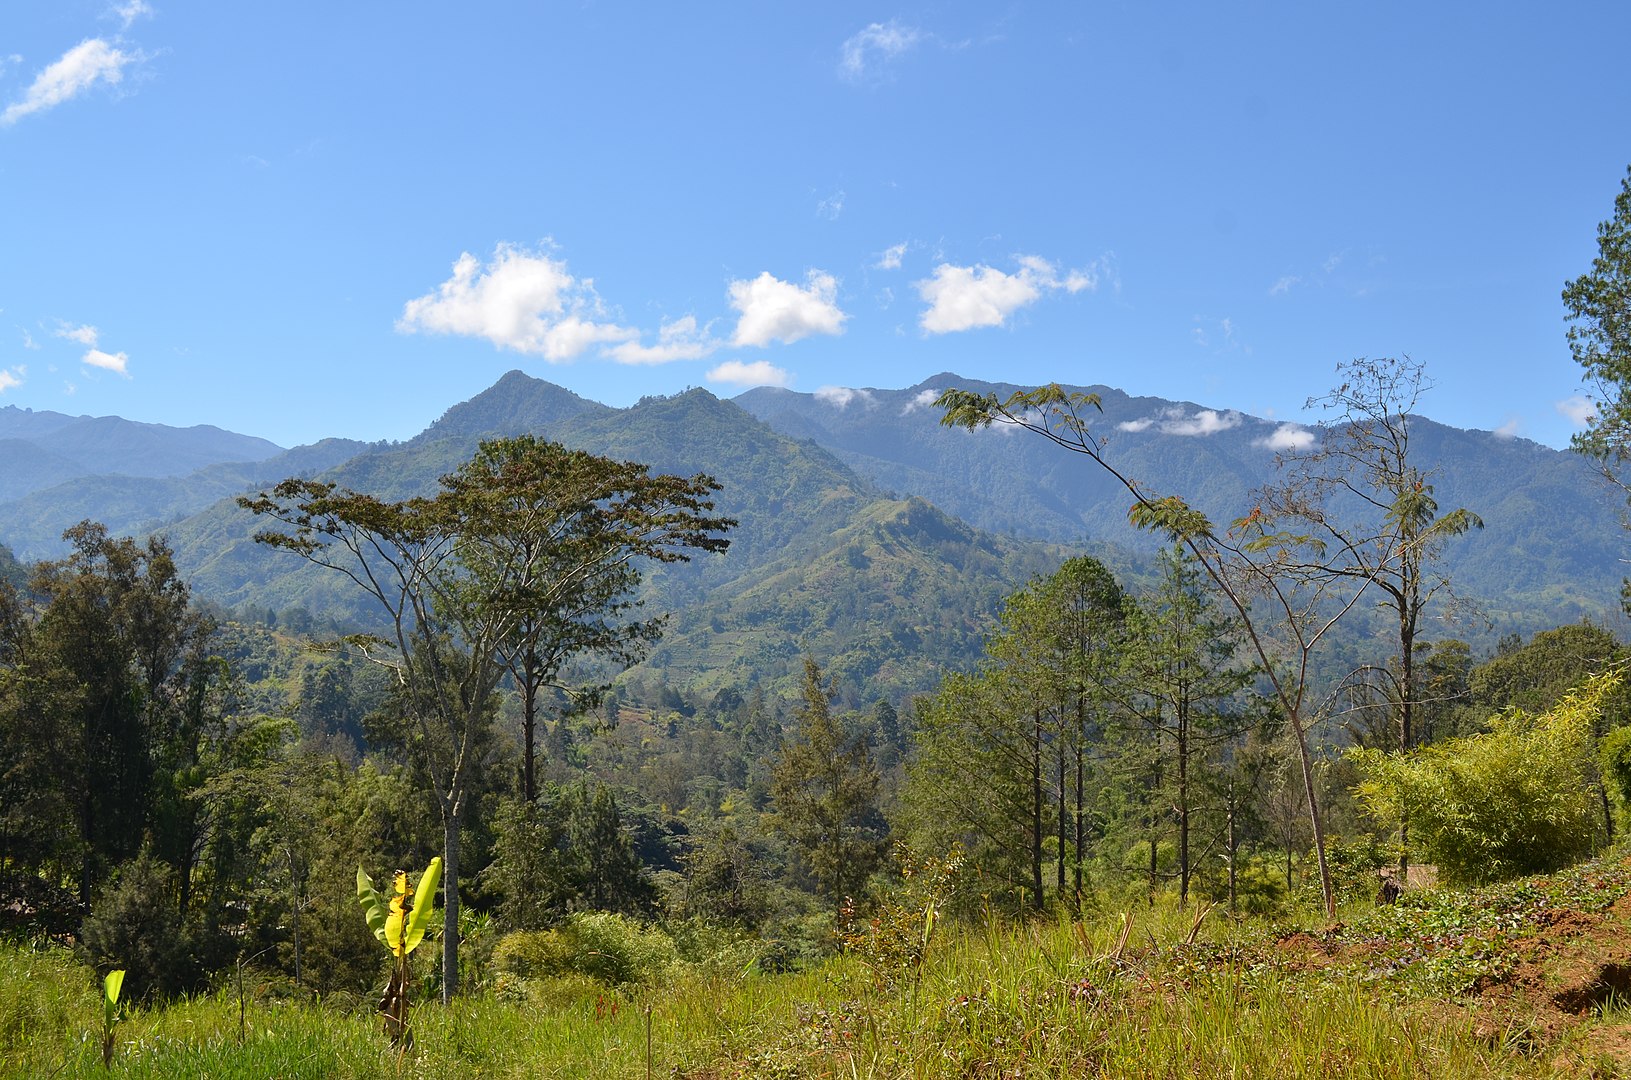 The West Papuan Highlands, where Trish first experienced aviation (By eGuide Travel - Papua New Guinea, CC BY 2.0, https://commons.wikimedia.org/w/index.php?curid=22969919)